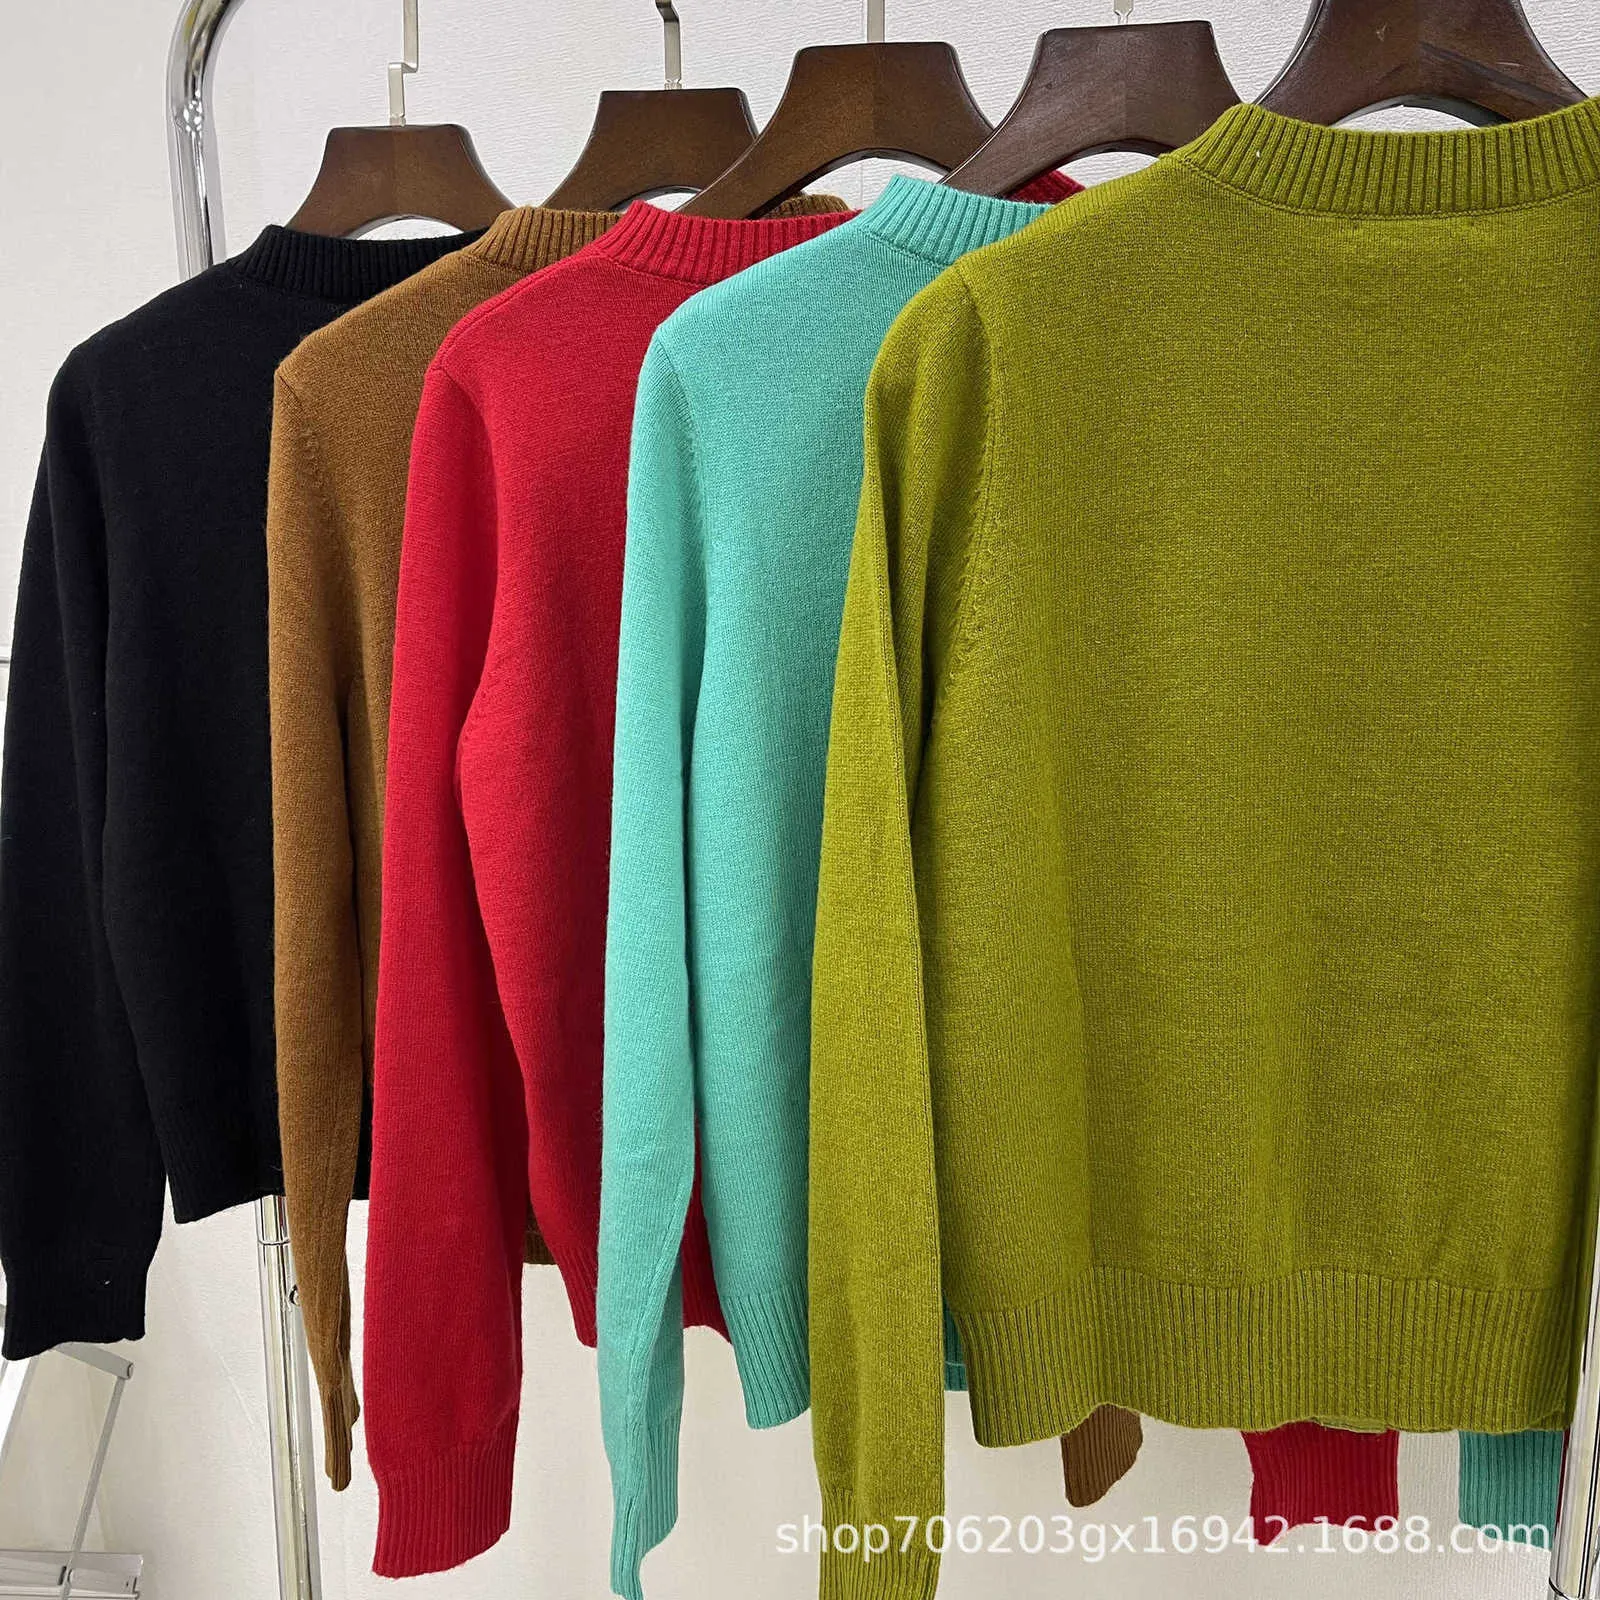 Women's Knits & Tees designer 23 Autumn/Winter MM cashmere macaron color series high-quality versatile fashionable round neck long sleeved sweater top LFSQ